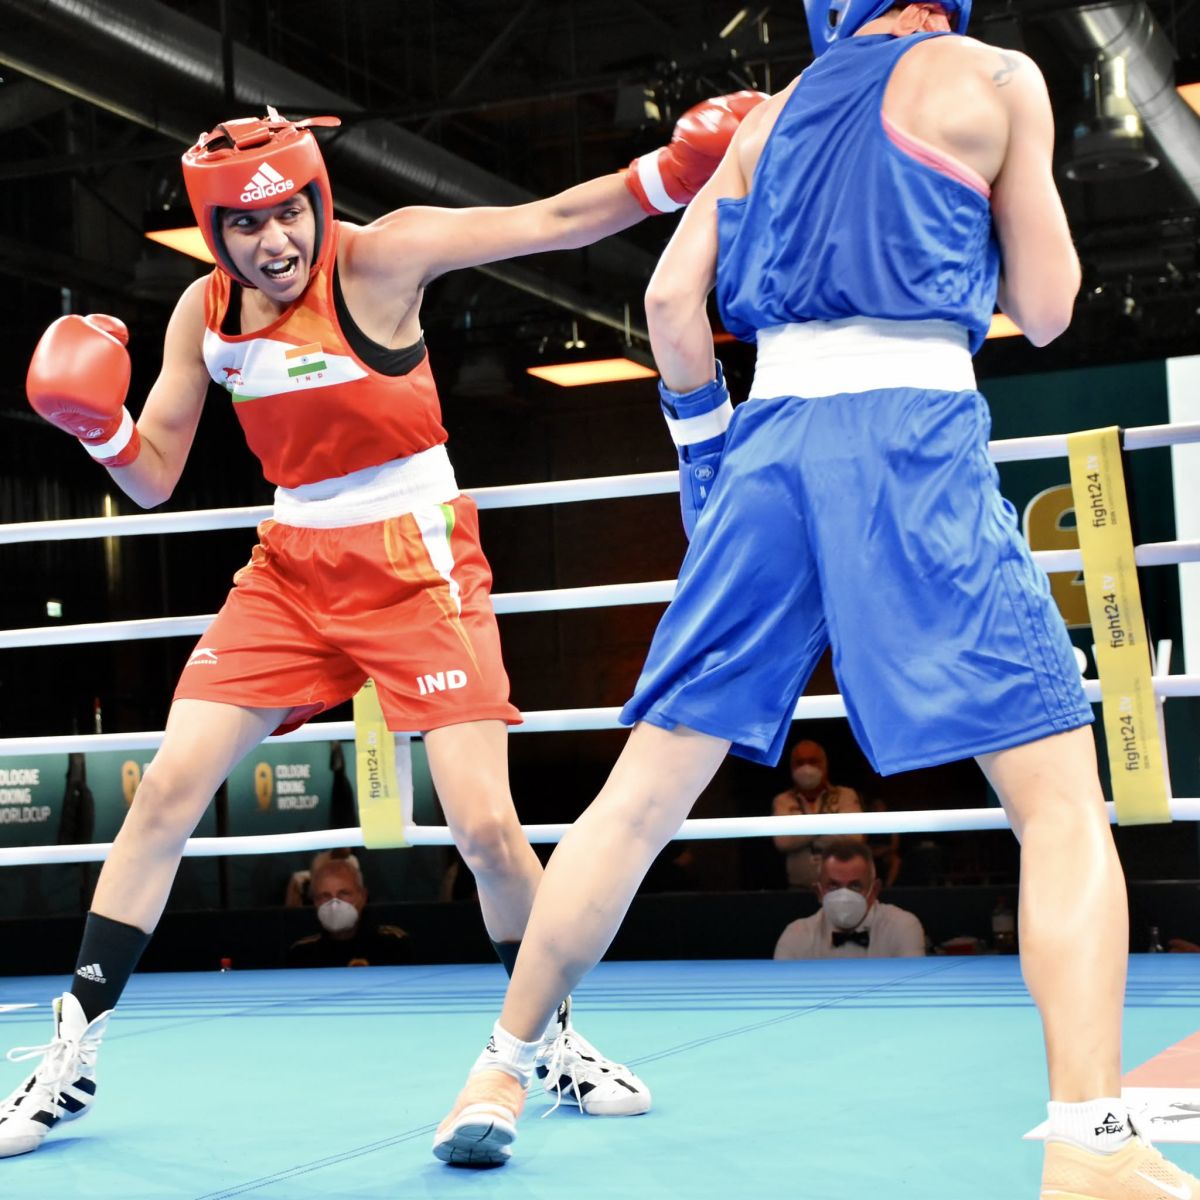 India's Simranjeet in action against Ukraine’s Marianna Basanets in their semifinal bout in the 60kg category at the Cologne Boxing World Cup 2020 on Friday